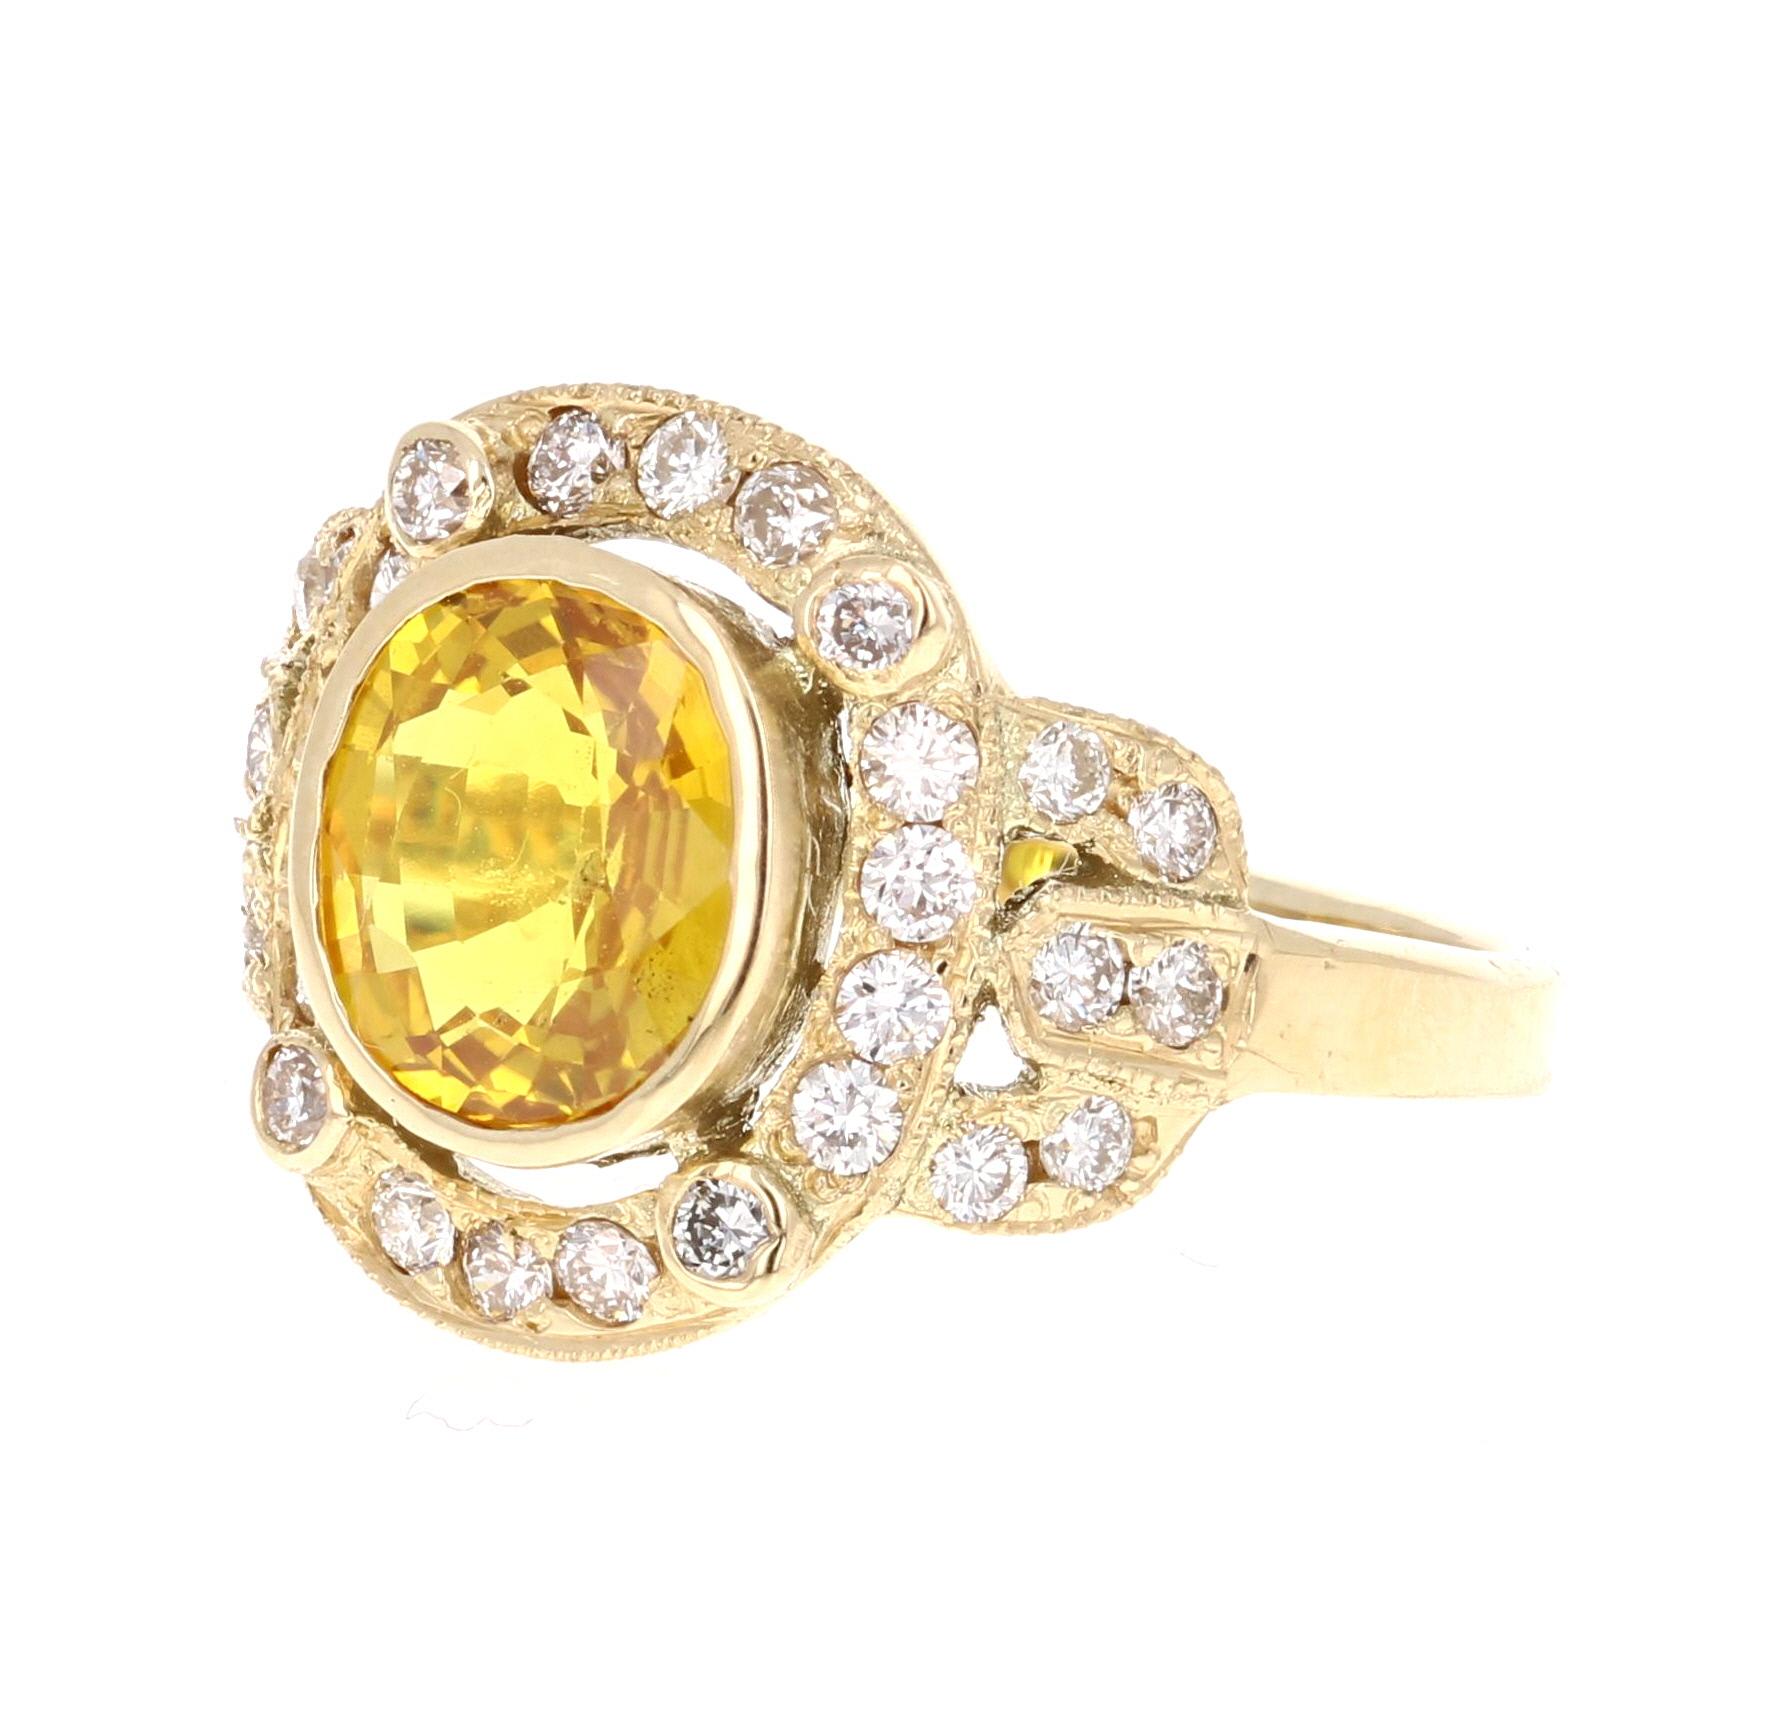 Art Deco Inspired Yellow Sapphire and Diamond Ring! 
This ring has a 2.25 Oval Cut Yellow Sapphire in the center of the ring and is surrounded by a cluster of 30 Round Cut Diamonds that weigh 0.63 carats. The clarity and color is VS2/H.  The total